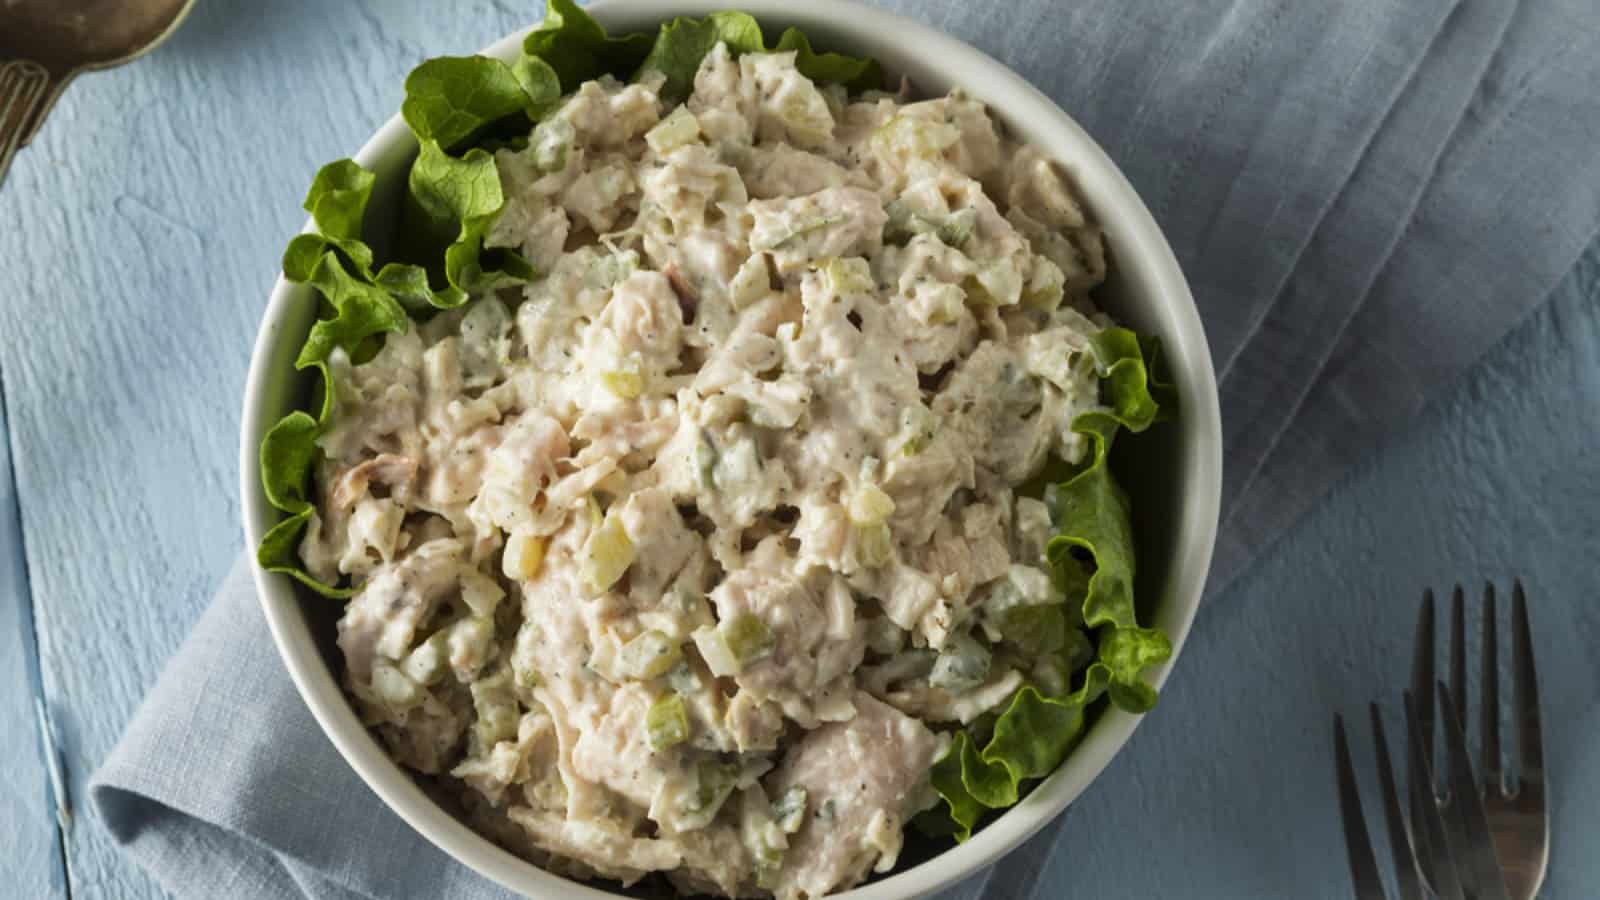 A bowl of chicken salad with lettuce and forks.